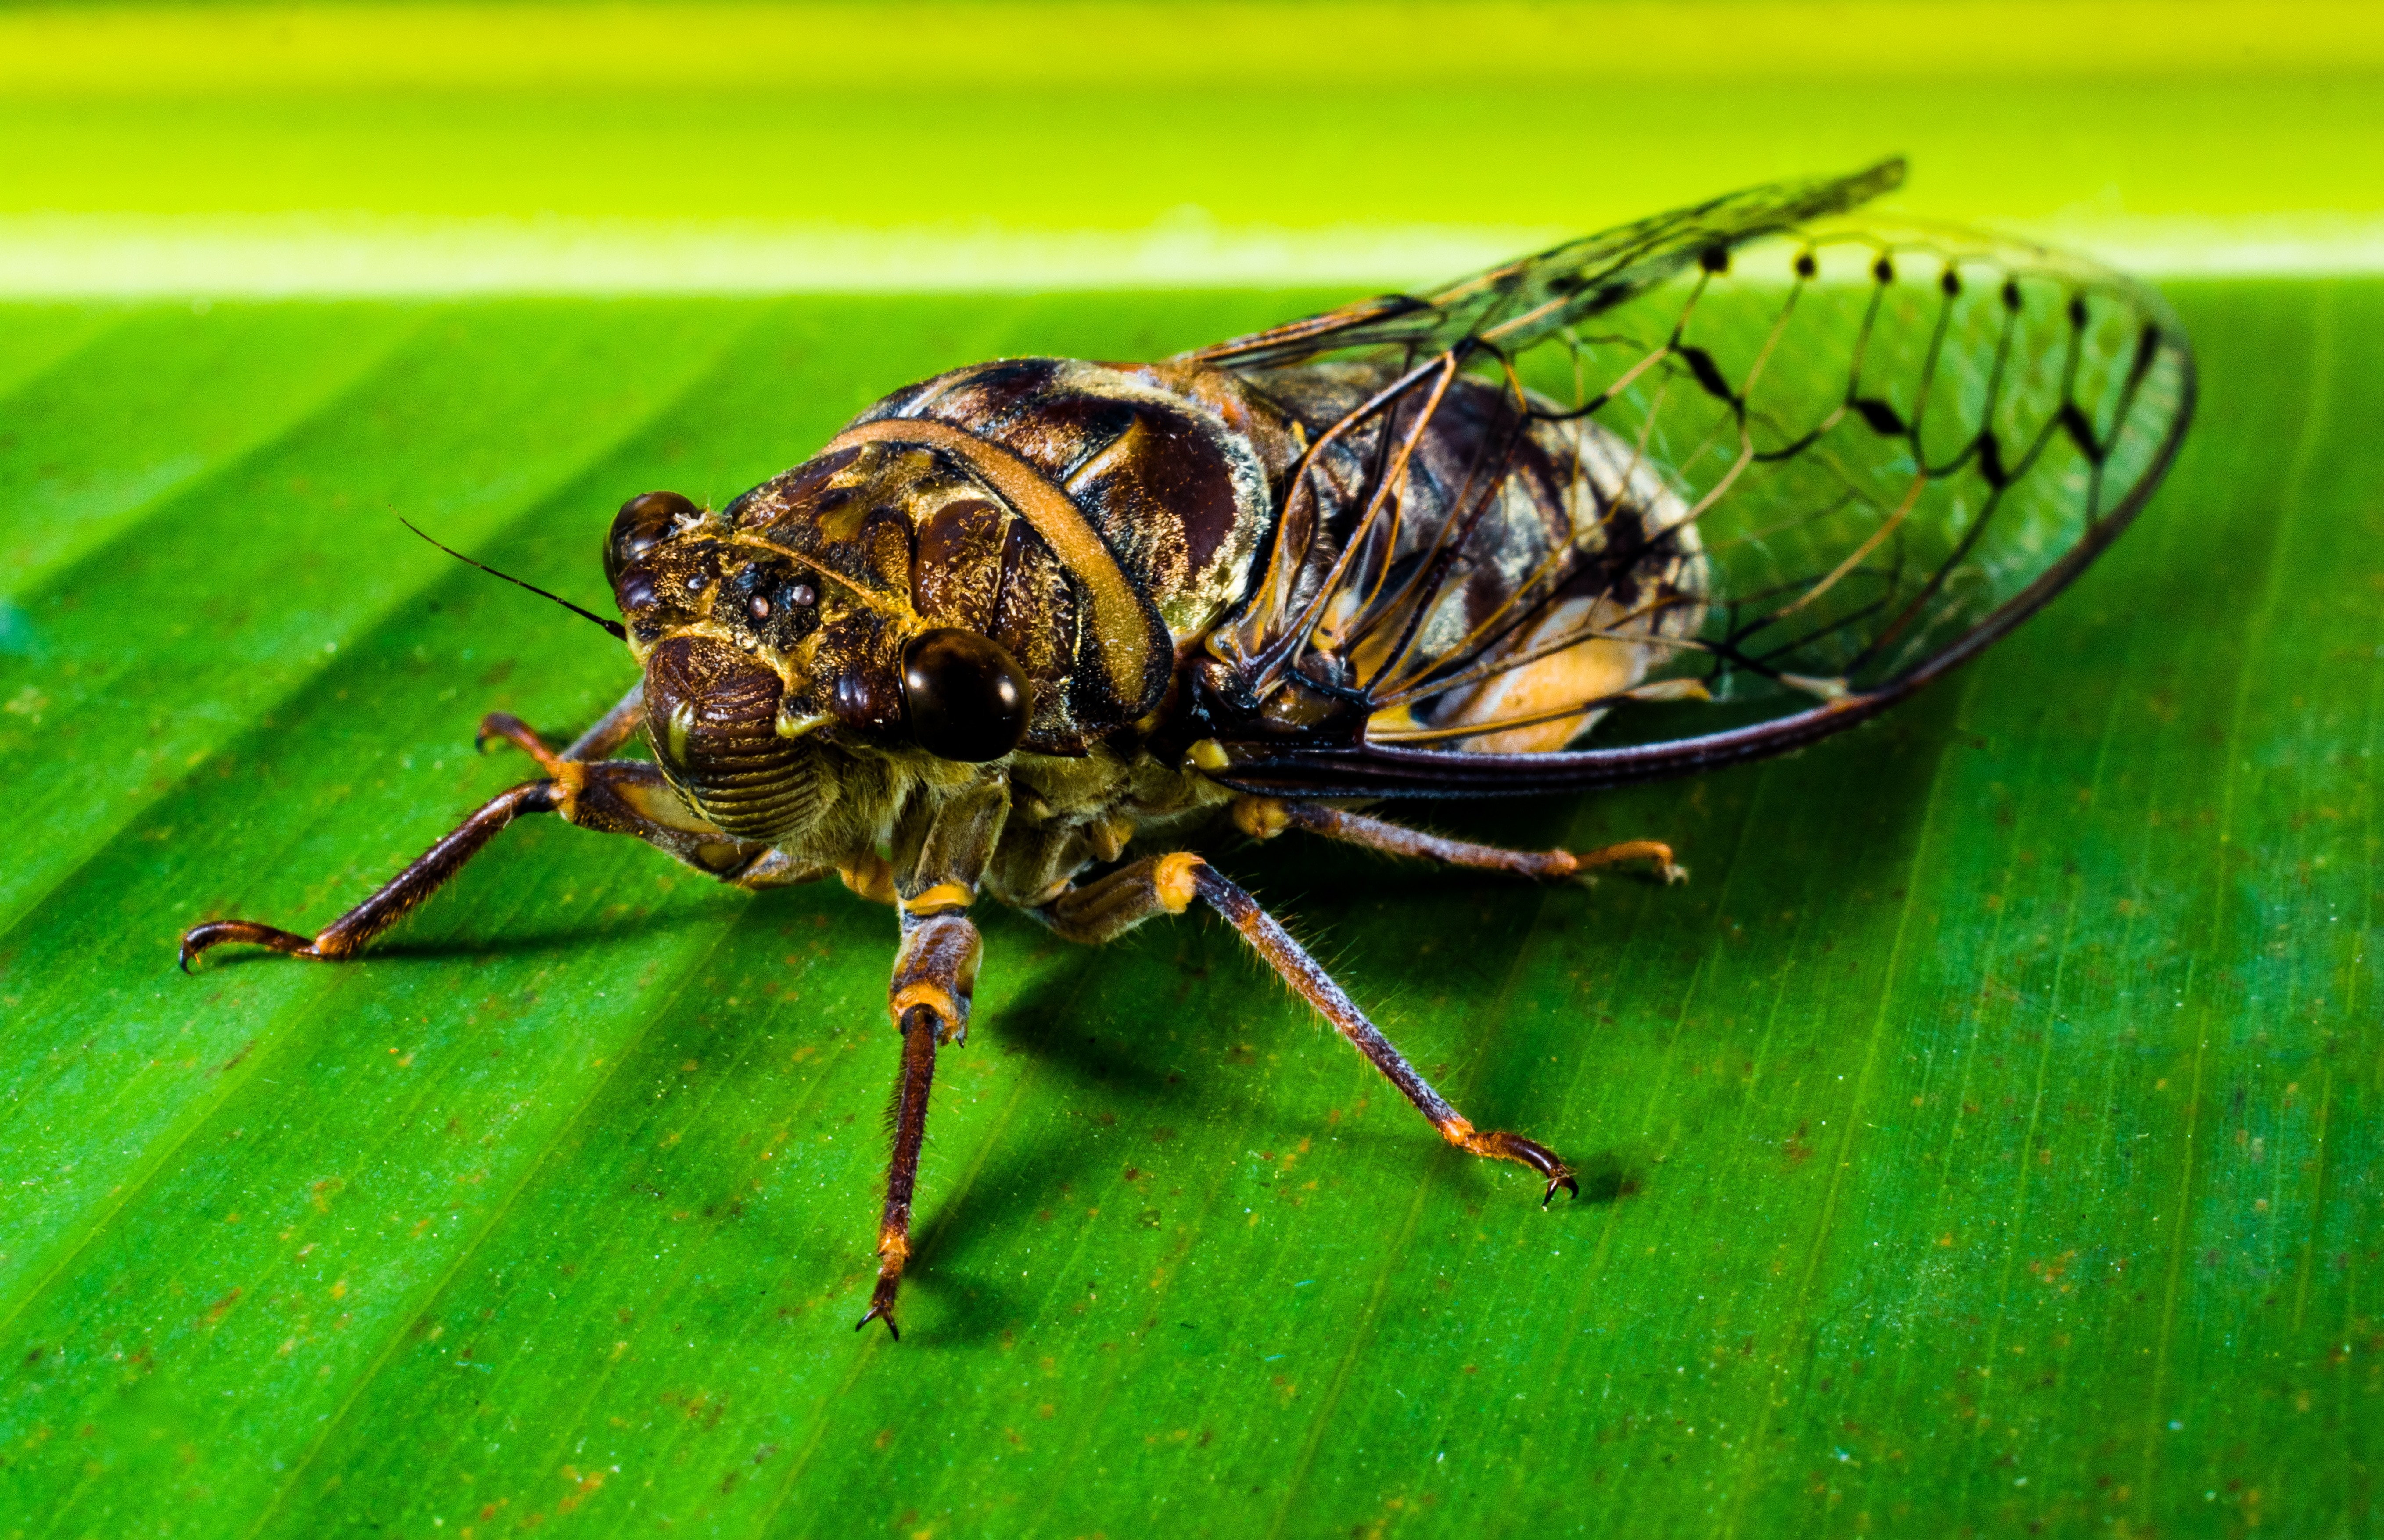 new-insect-whopper-insect-close-wallpaper.jpg